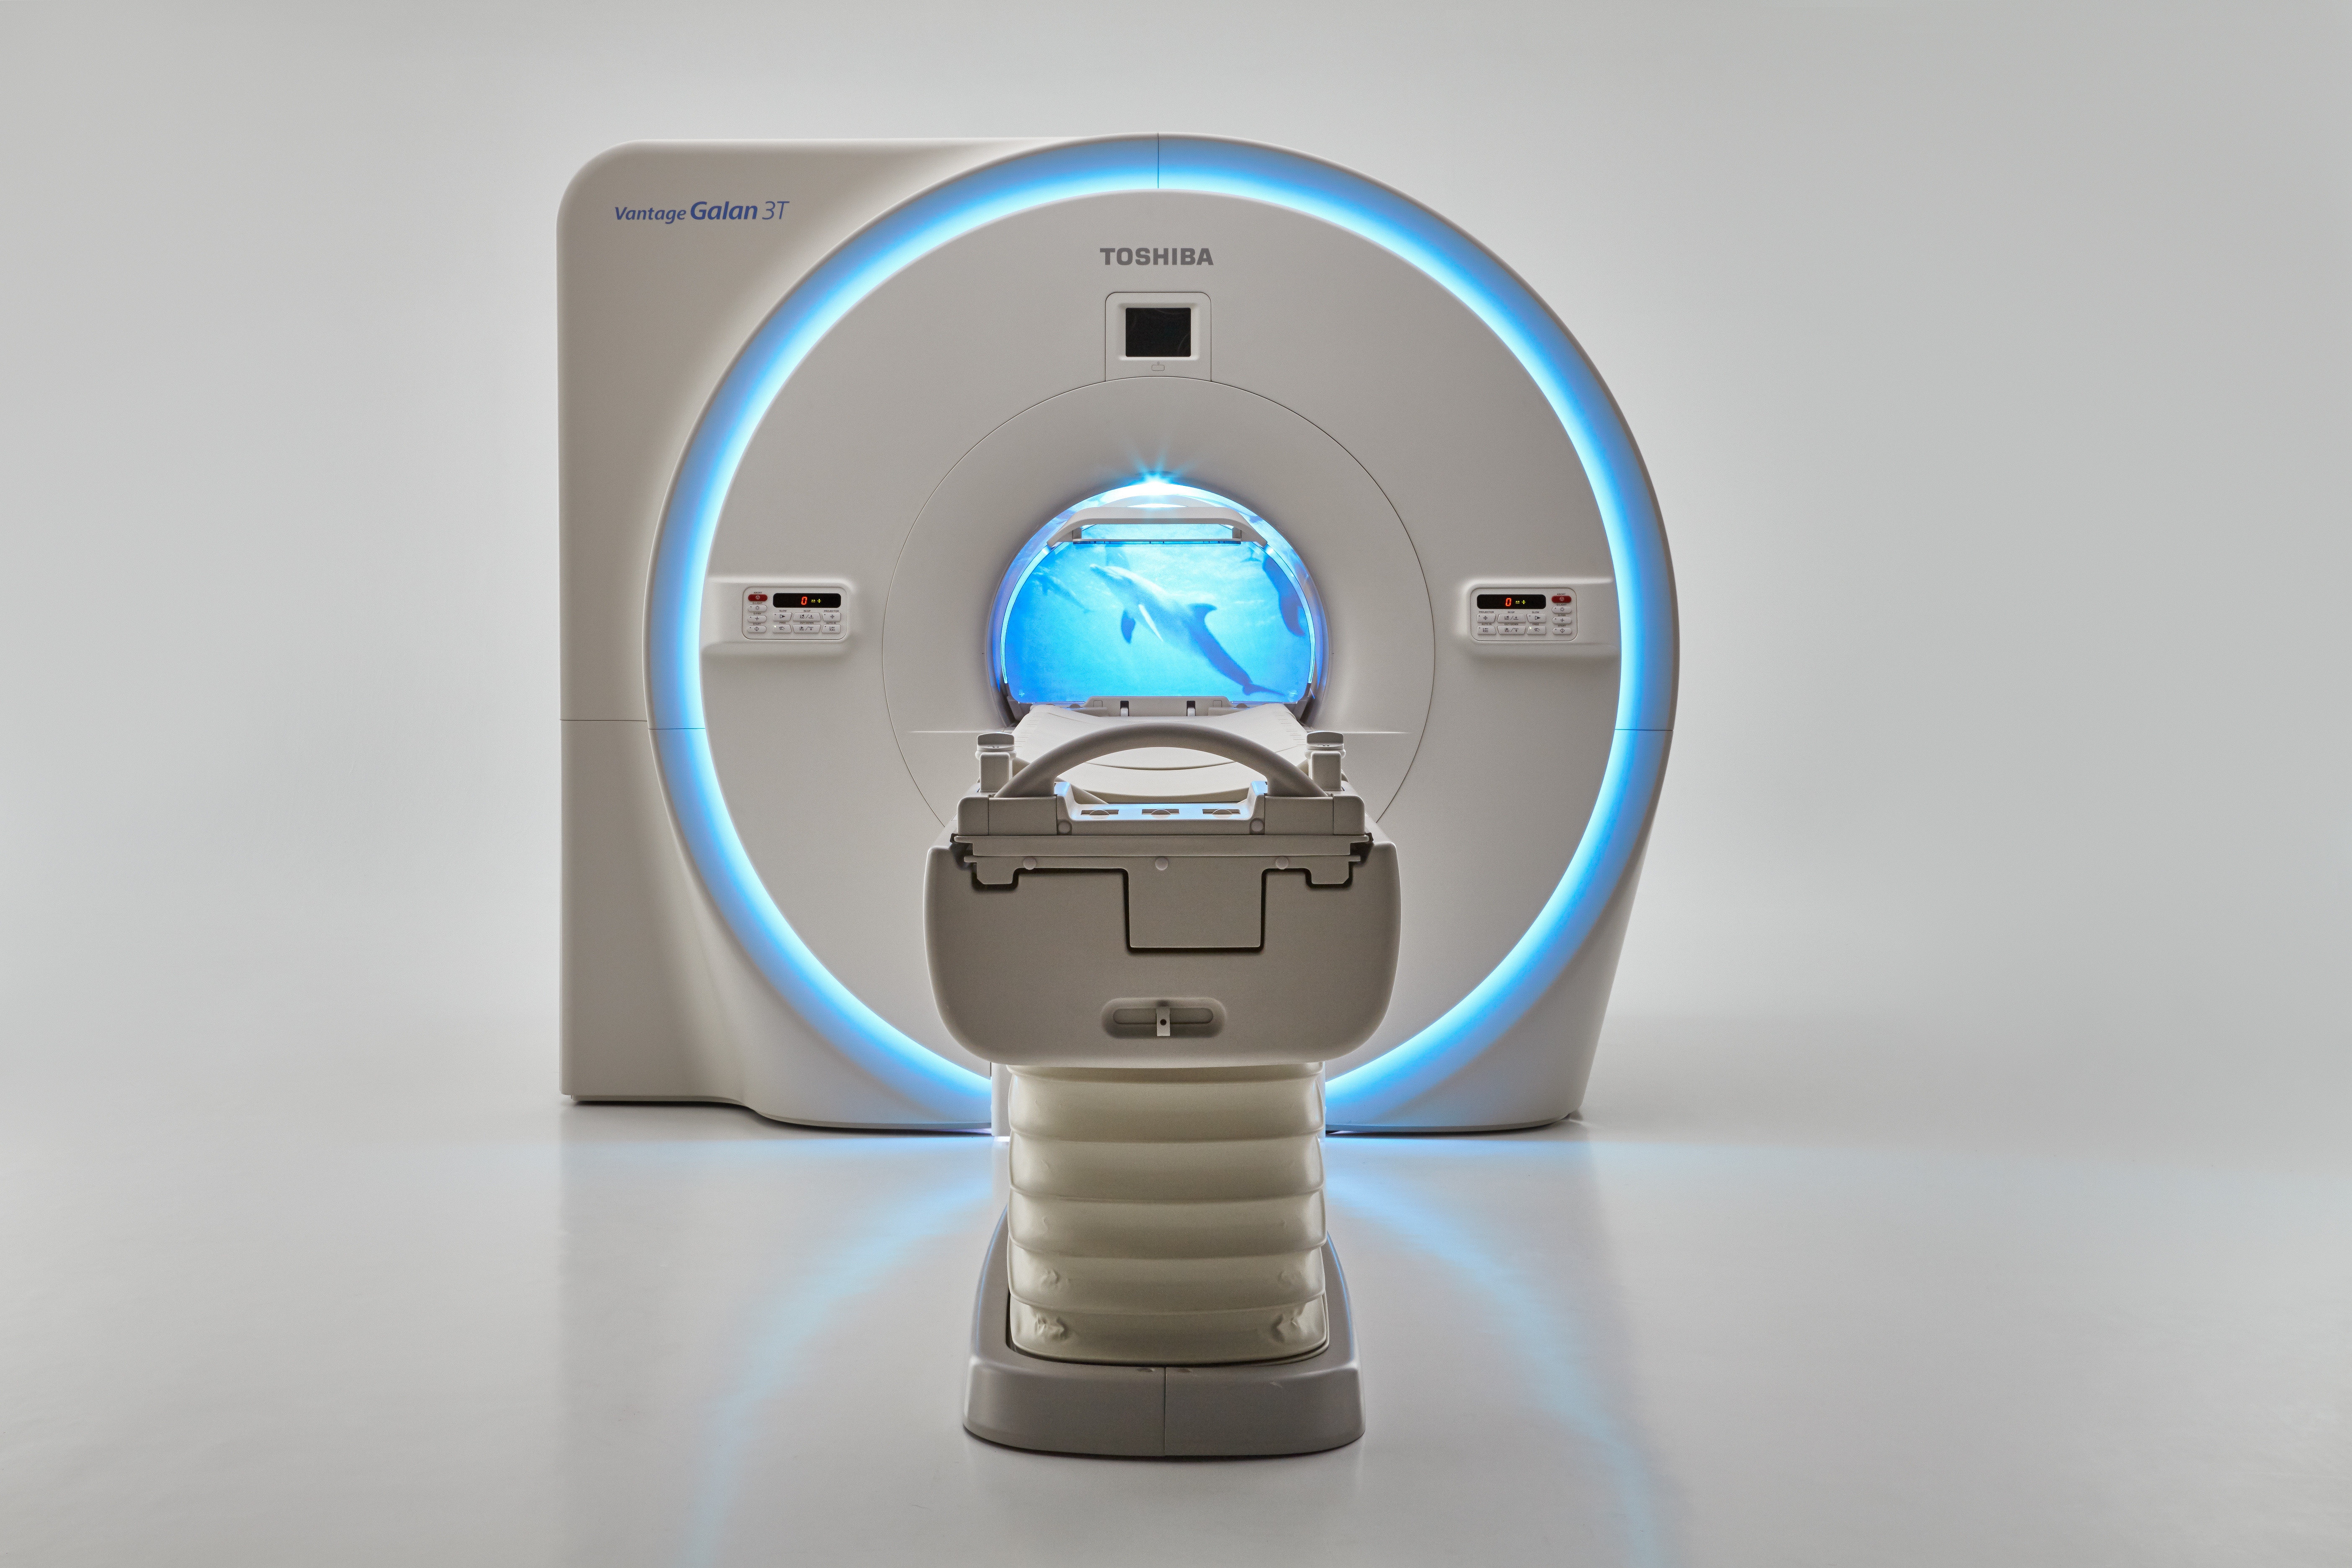 Toshiba Medical’s new MR Theater offers an immersive virtual experience for patients, putting them at ease and allowing clinicians to complete MR exams quickly with high-quality images.